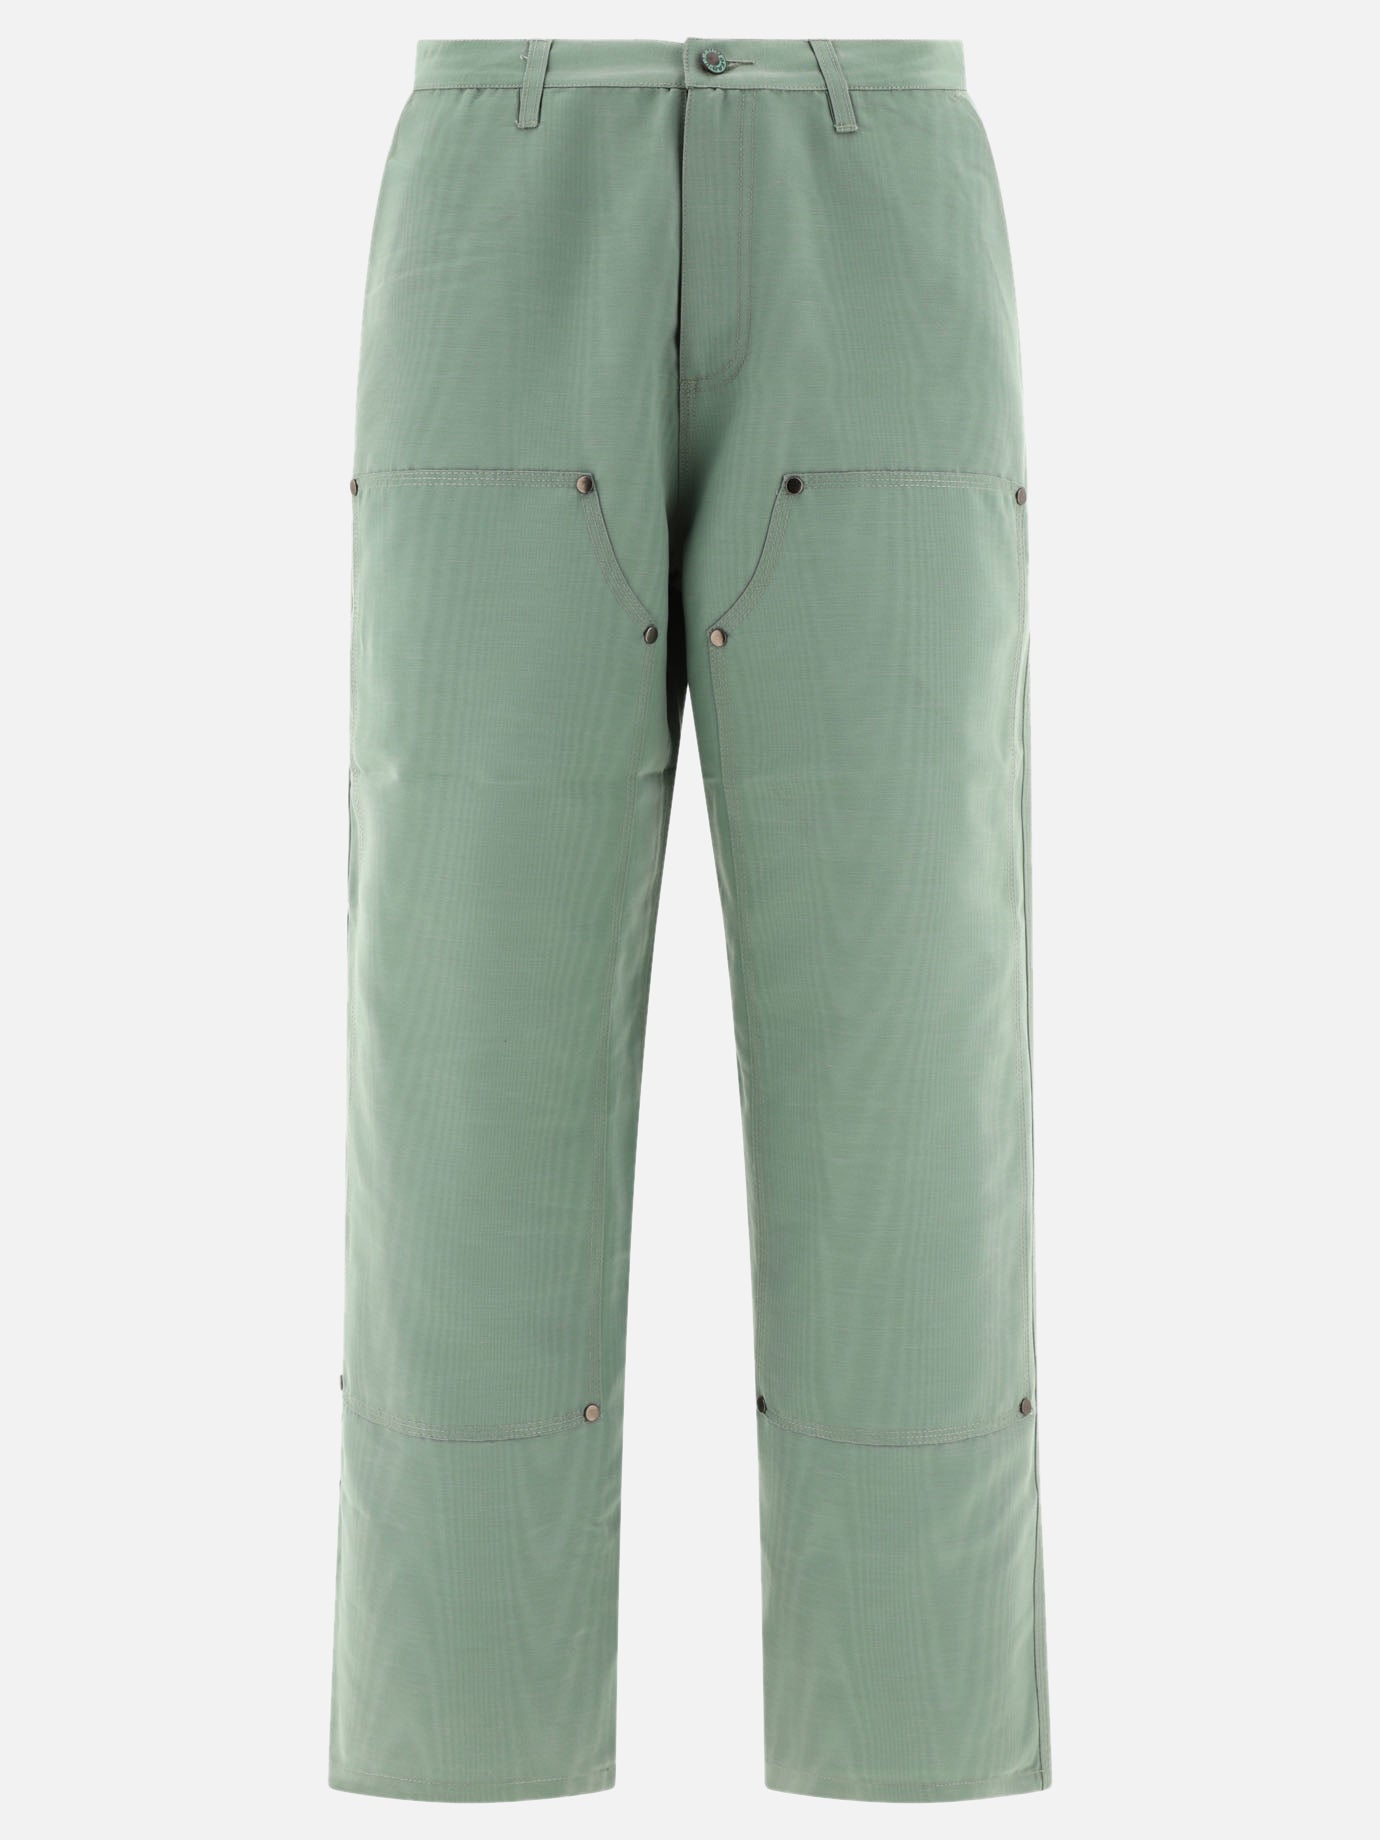 "Double Knee" trousers